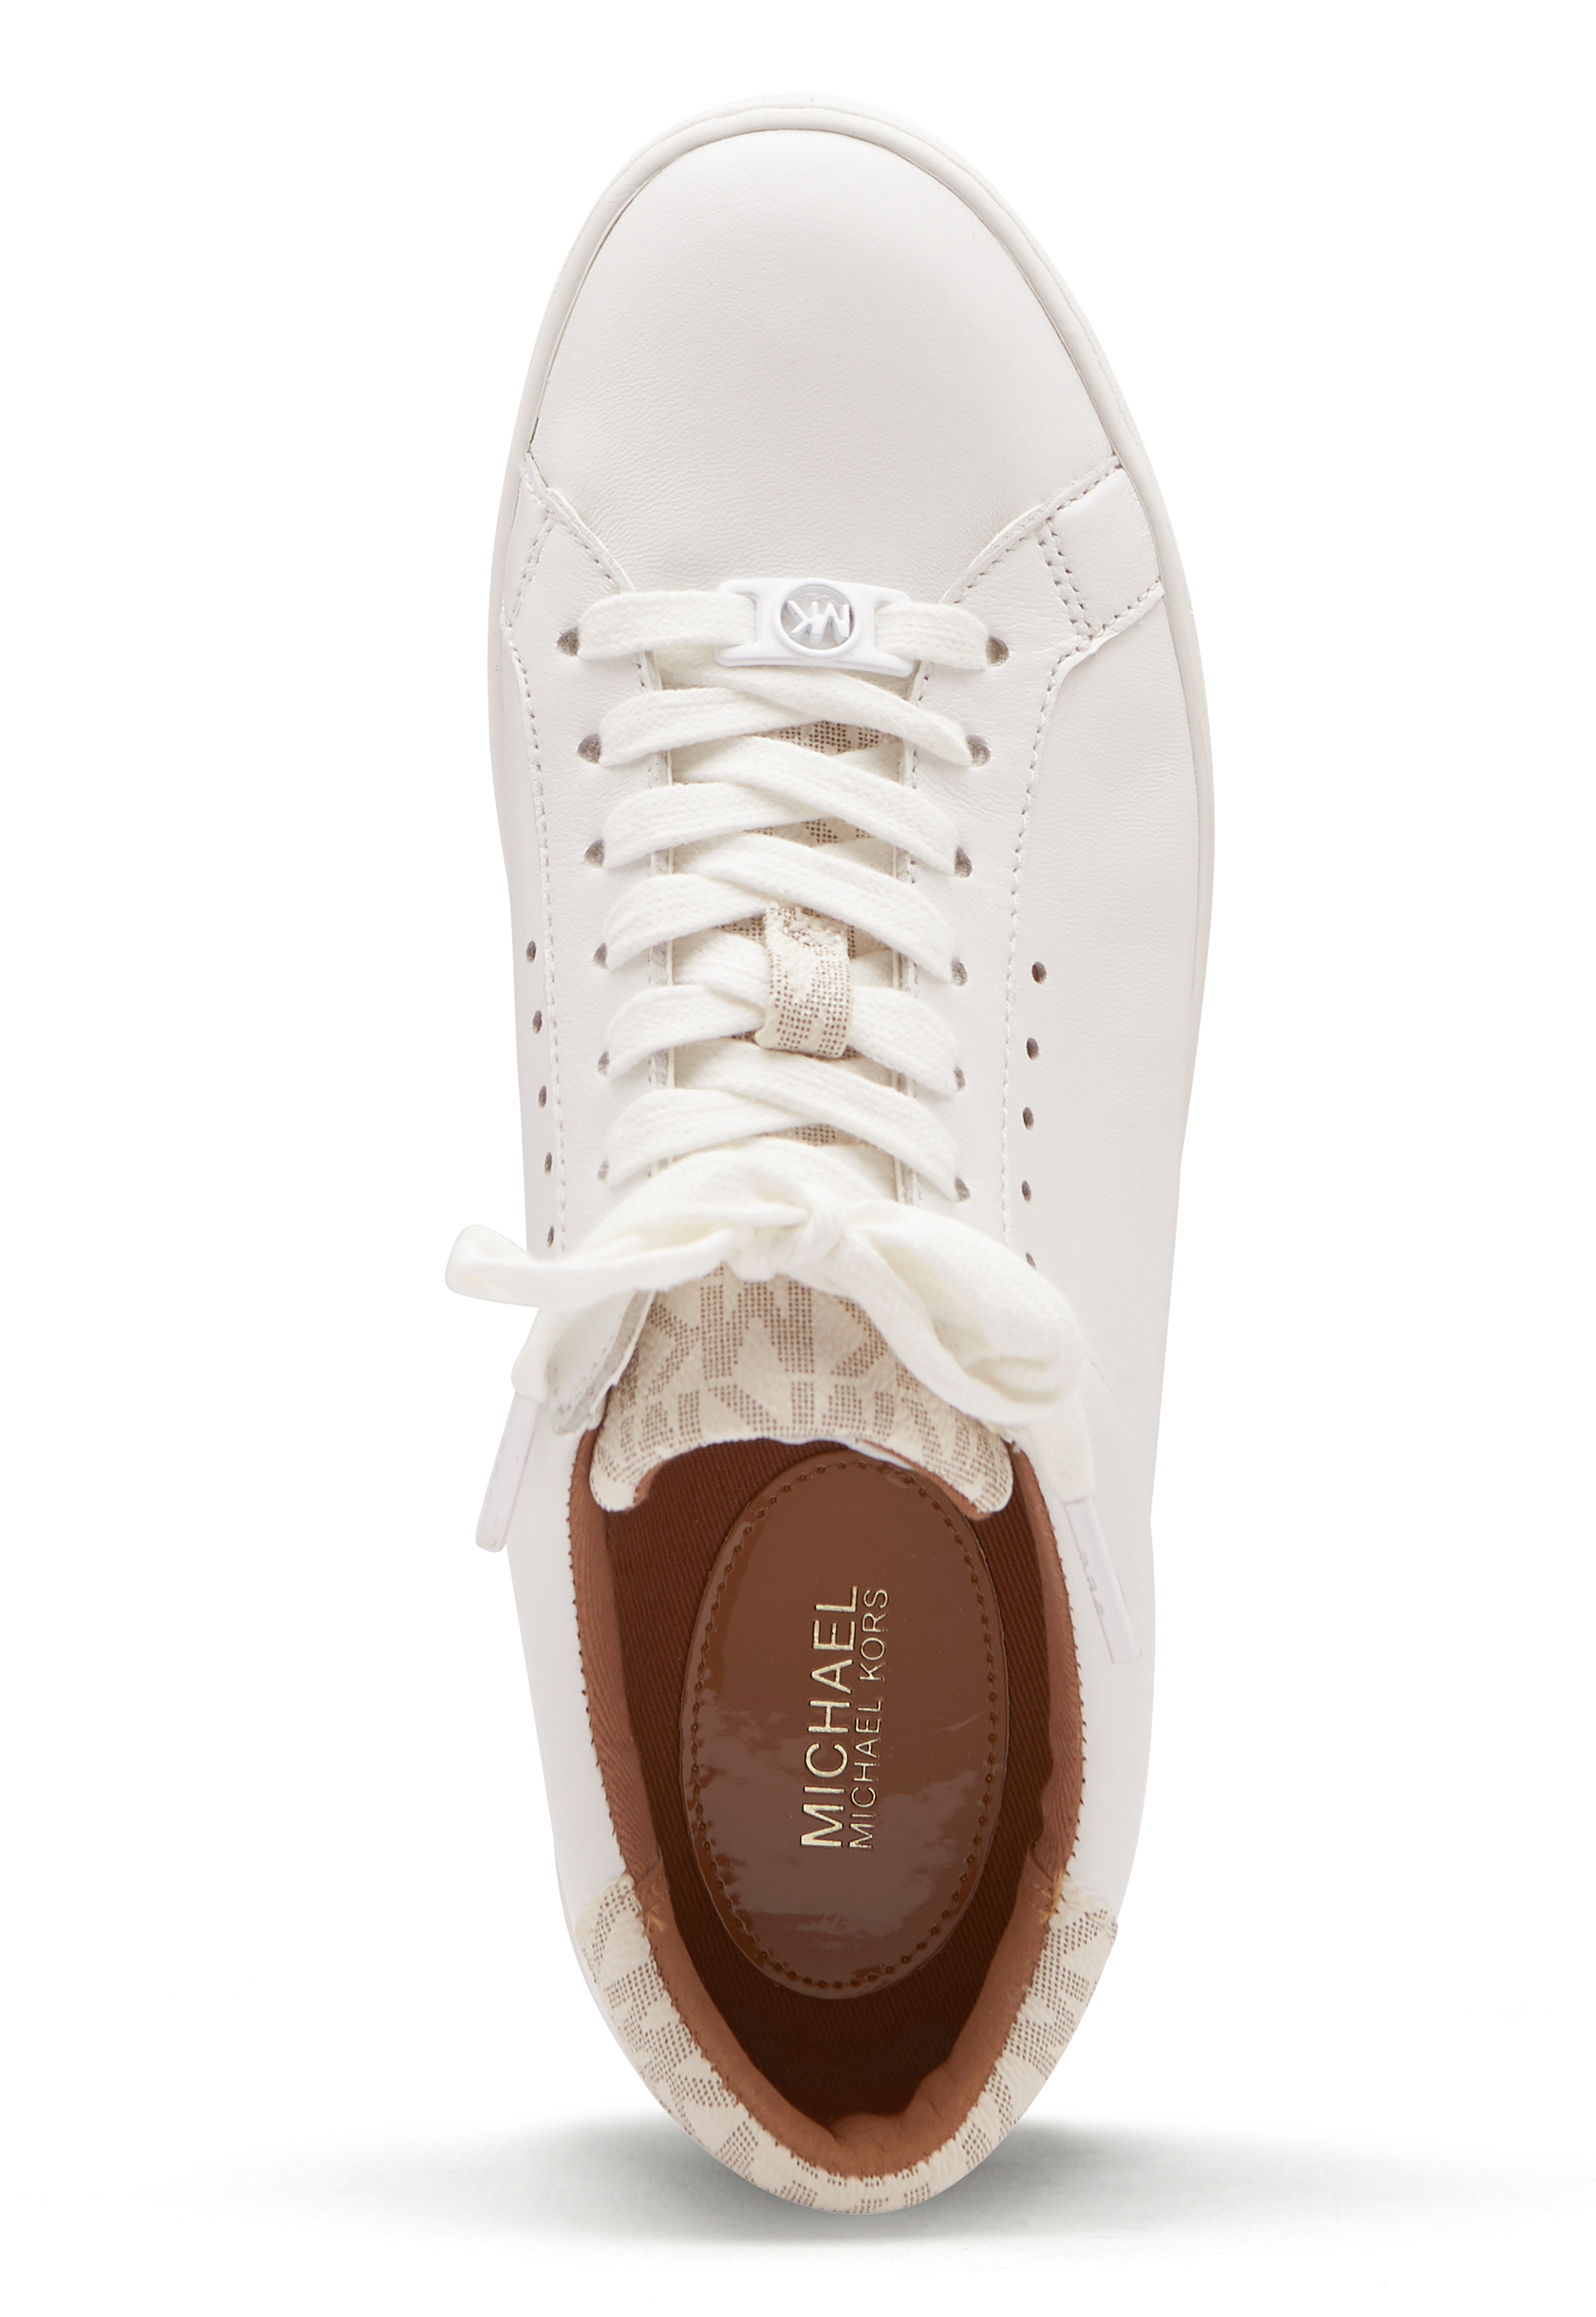 michael kors sneakers lace up